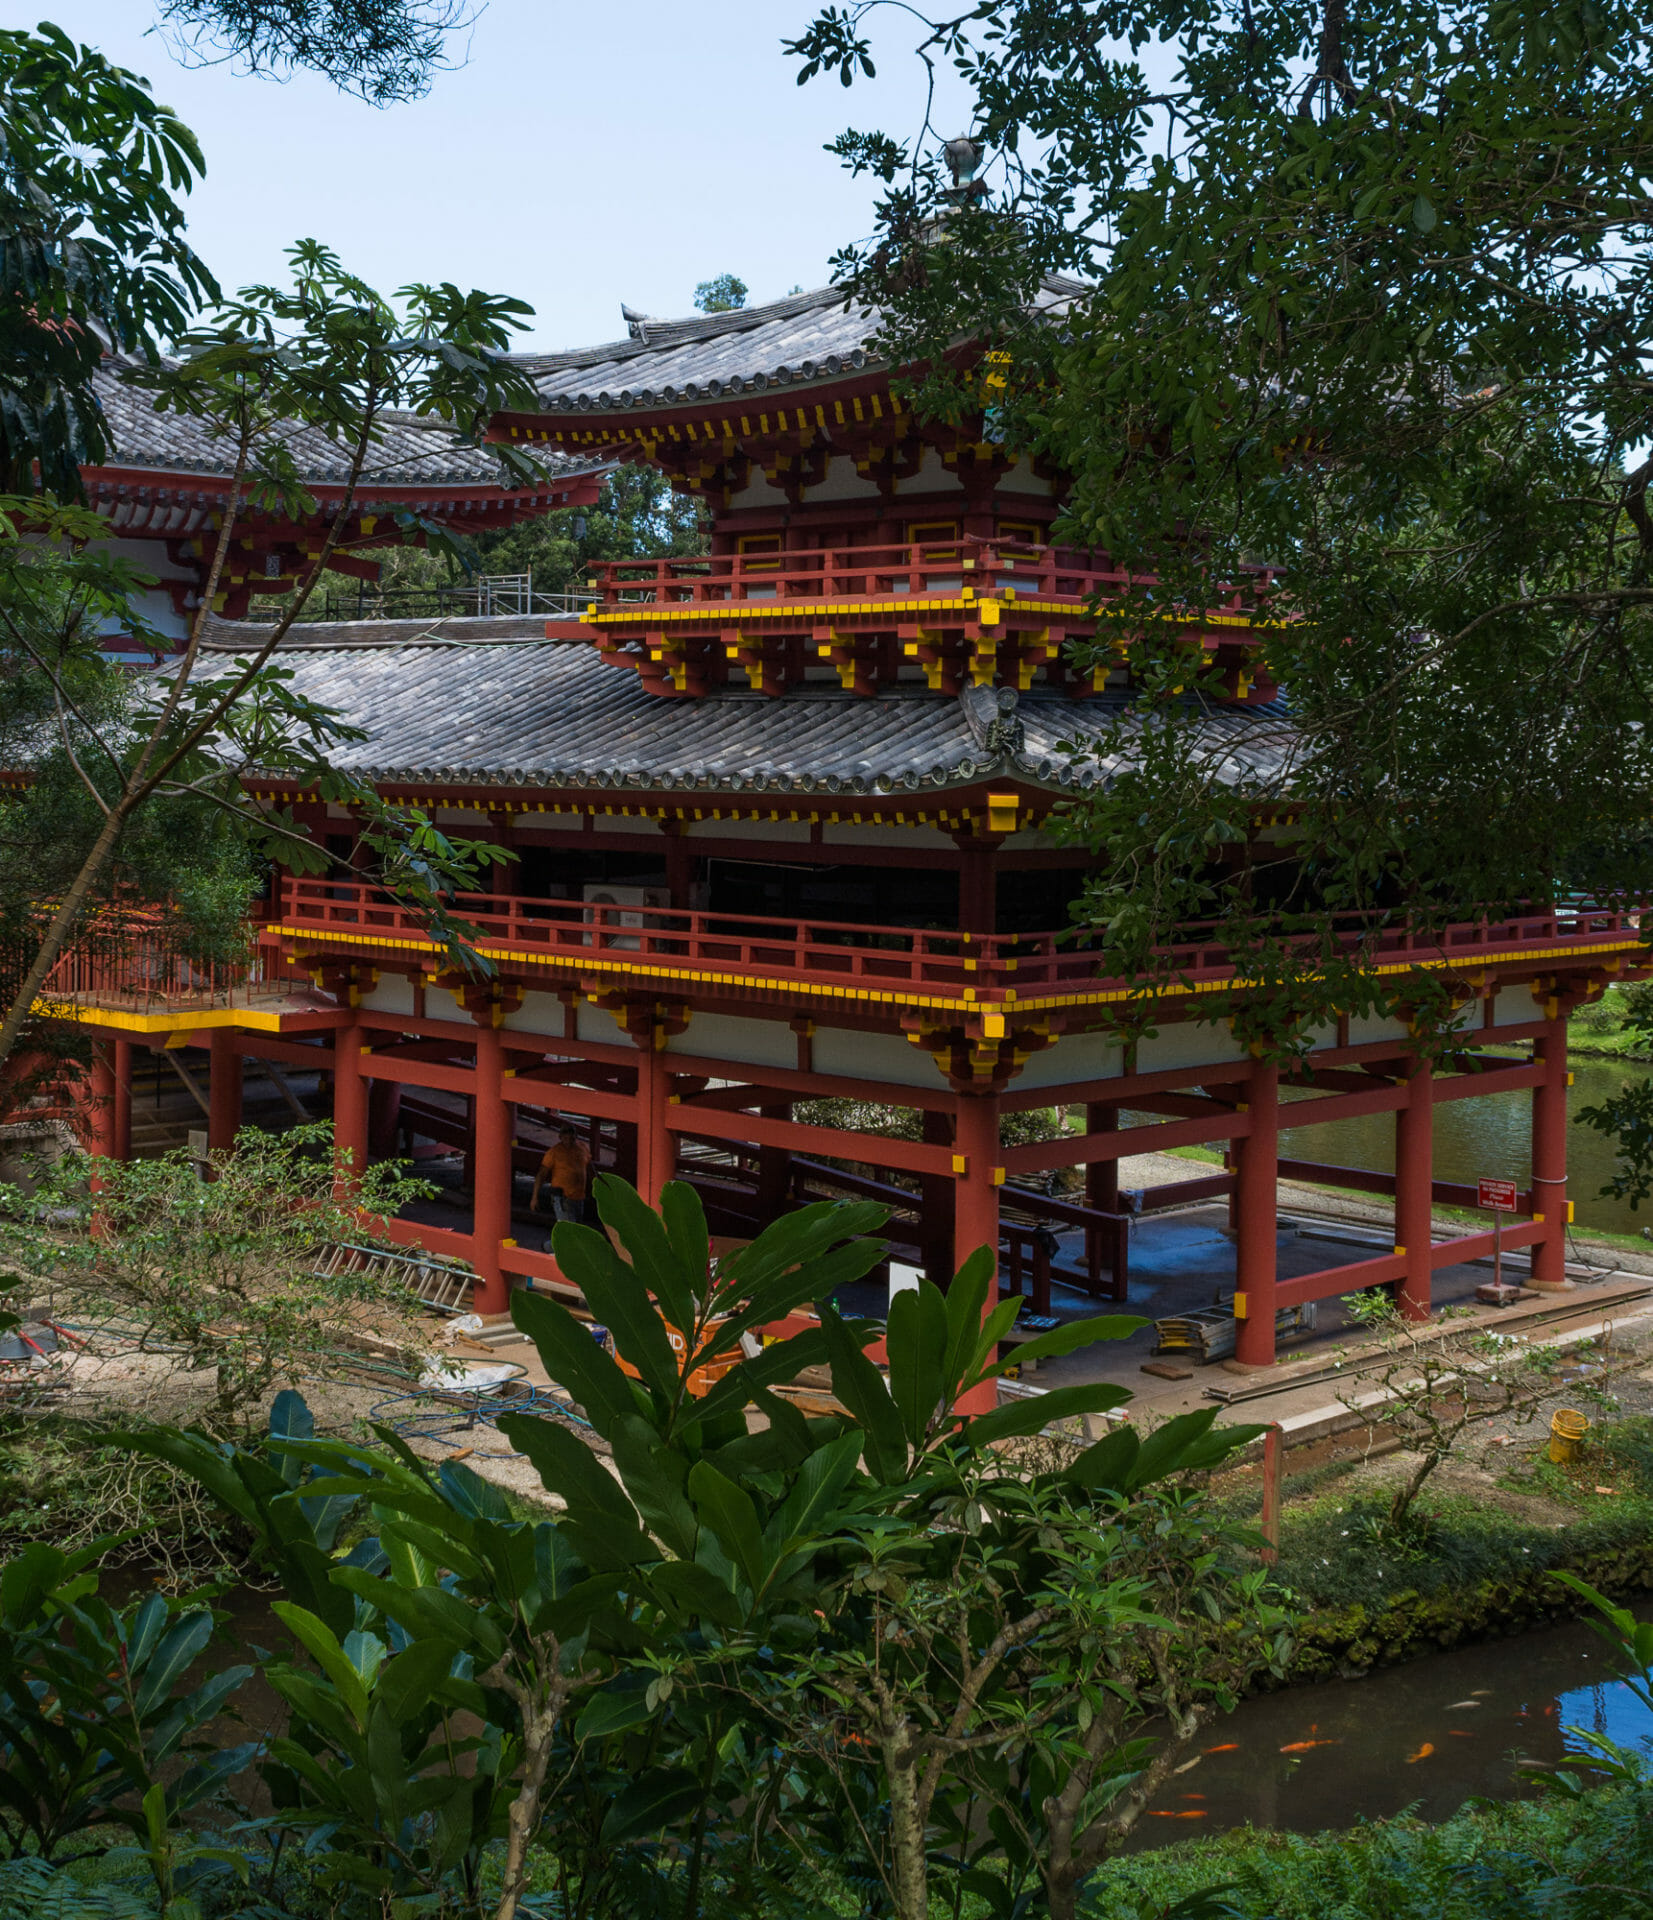 Byodo-In Temple was undergoing renovation